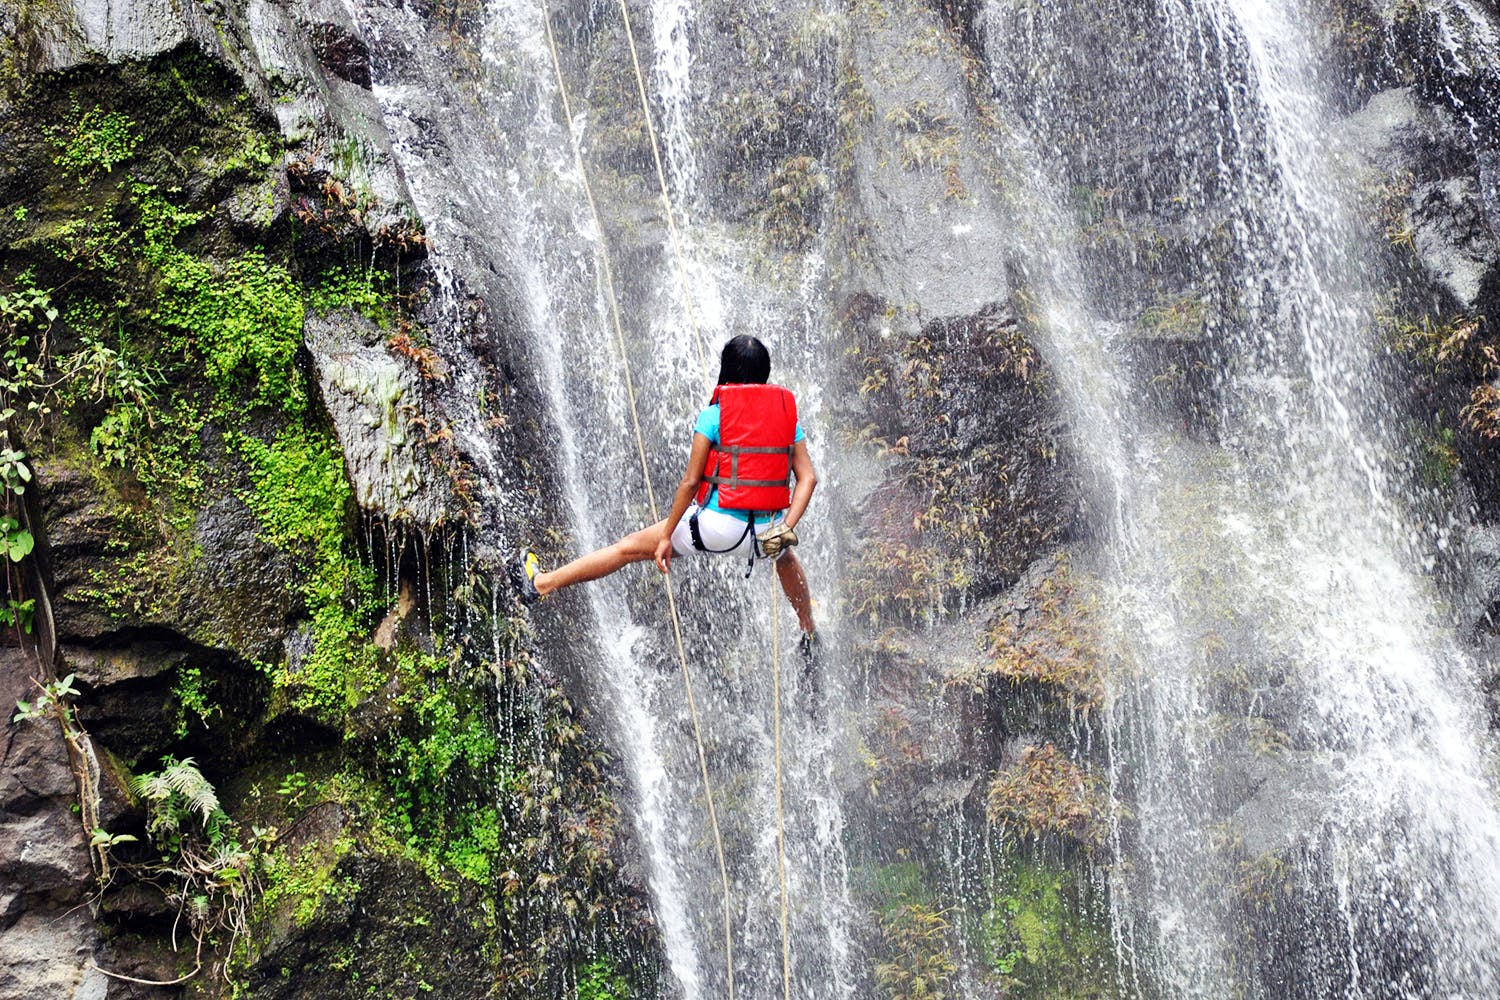 Waterfall,Adventure,Recreation,Water resources,Sport climbing,Water,Watercourse,Extreme sport,Abseiling,Climbing